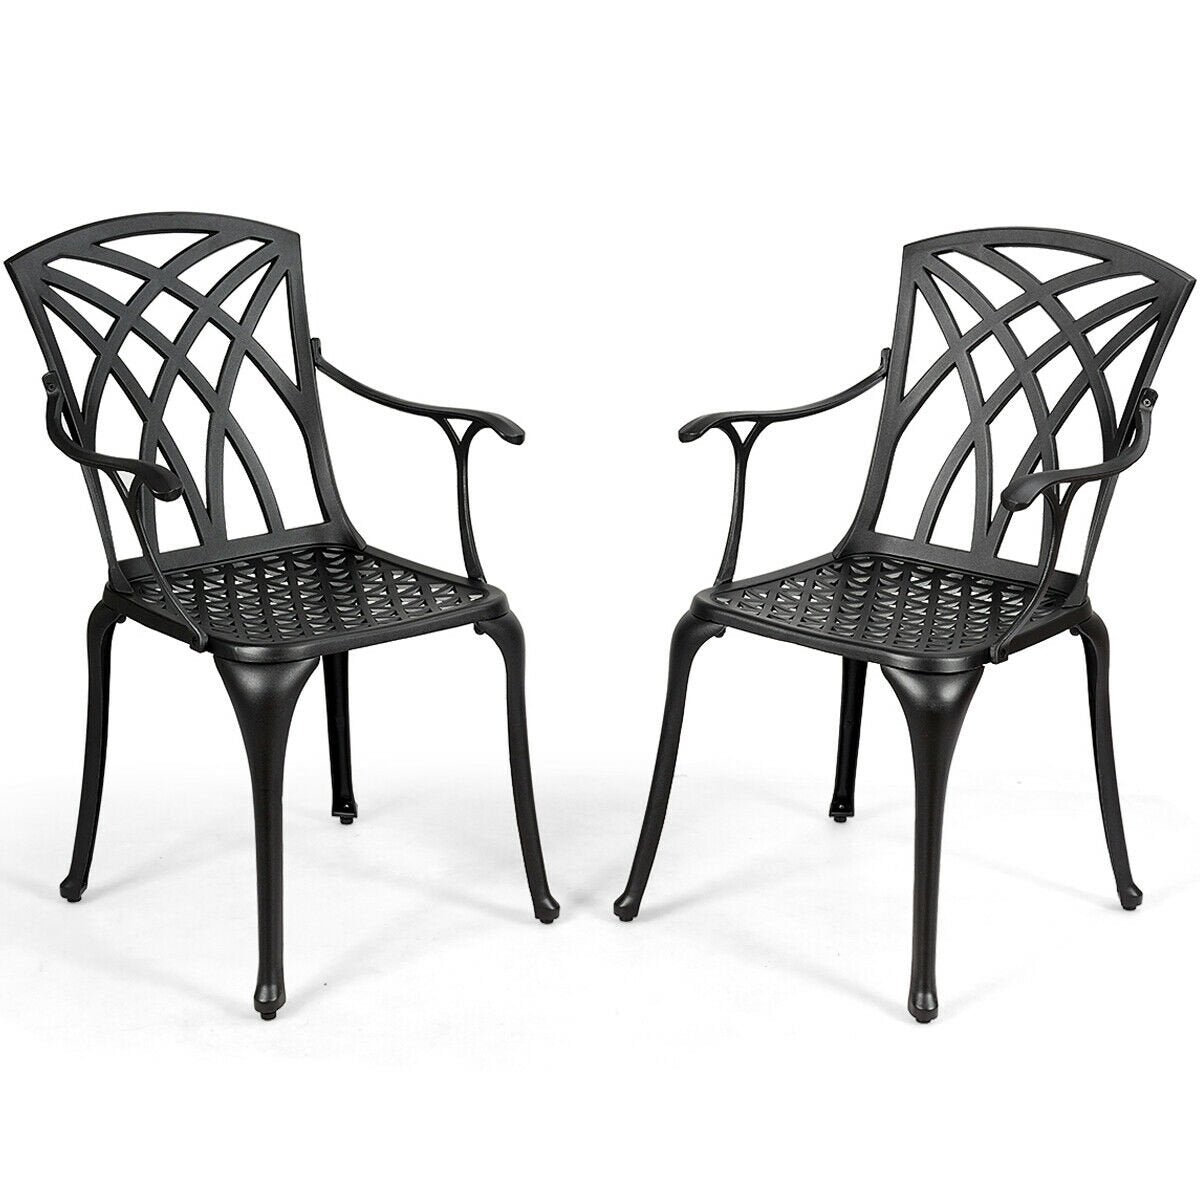 2 Pieces Durable Aluminum Dining Chairs Set with Armrests, Black - Gallery Canada